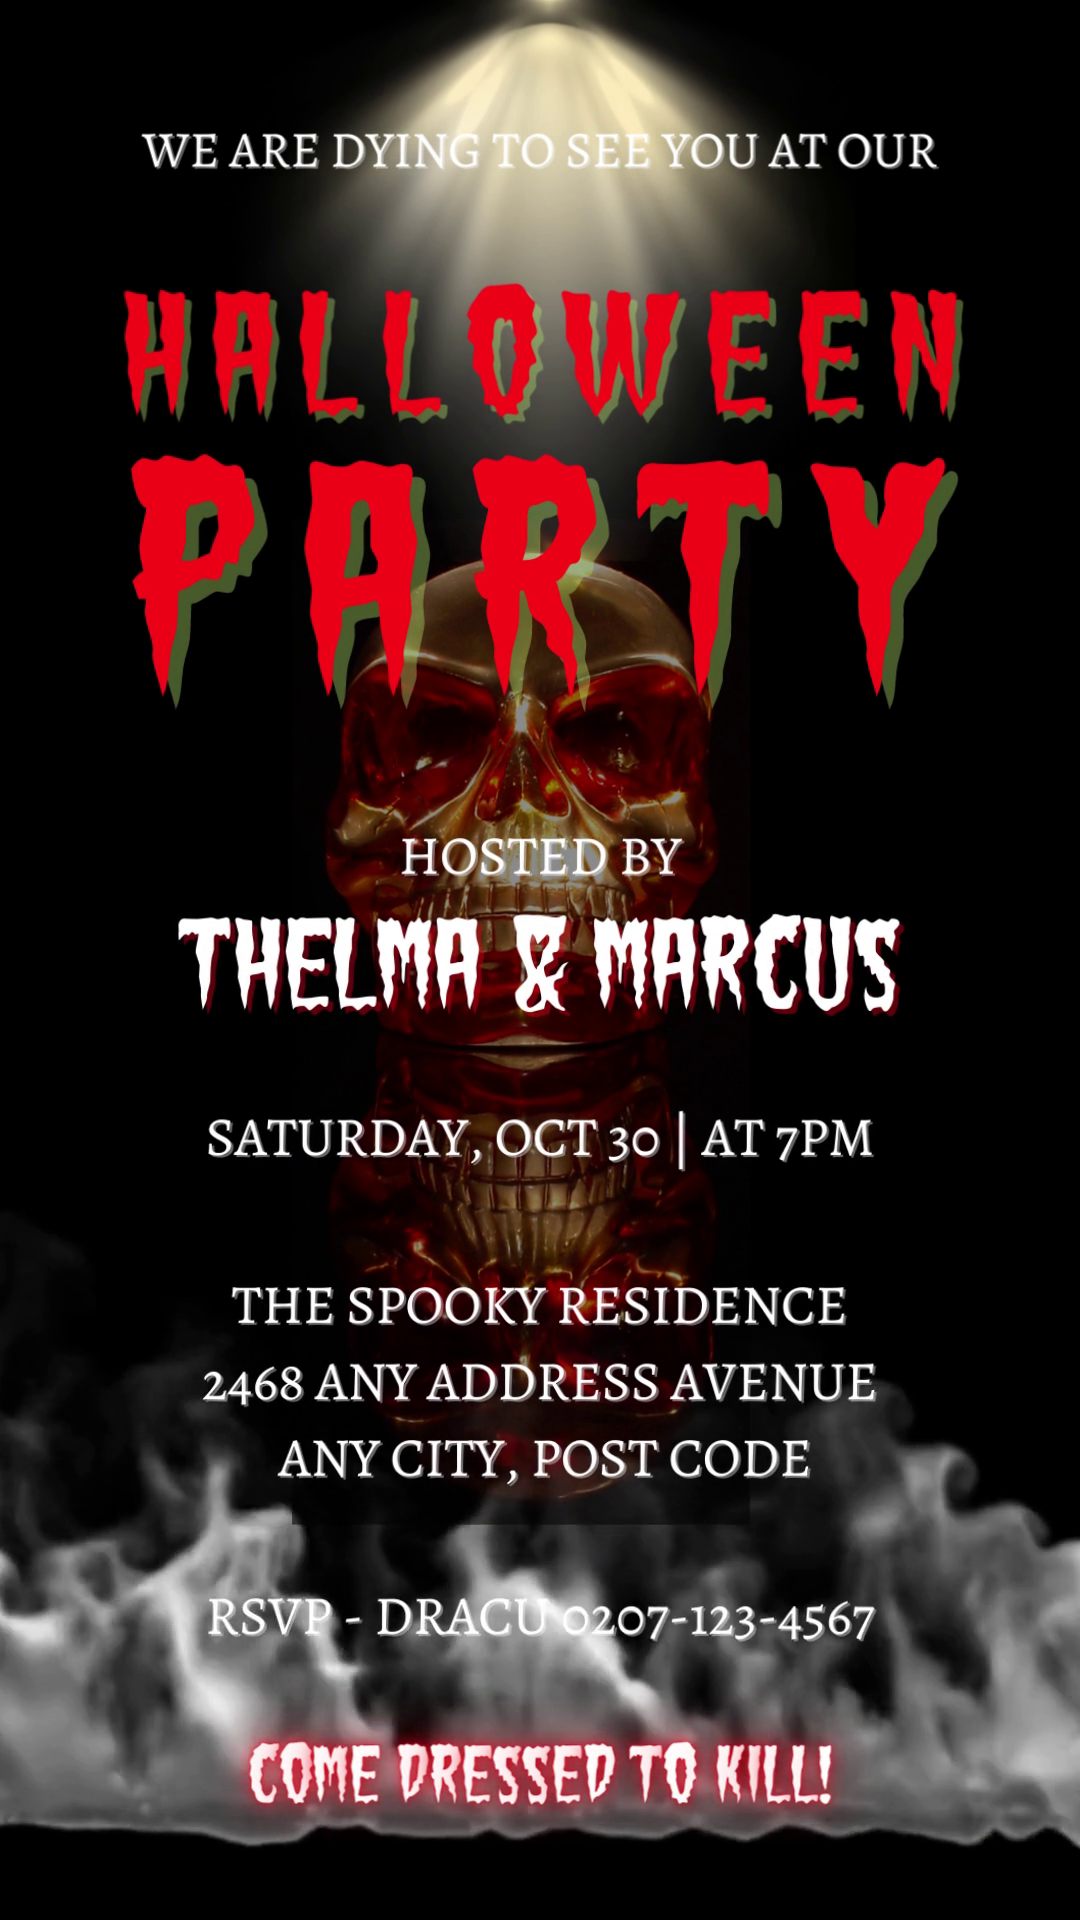 Red Smoking Skull Halloween Party Video Invite, featuring a red skull hologram with white smoke and editable text, designed for digital personalization via Canva.